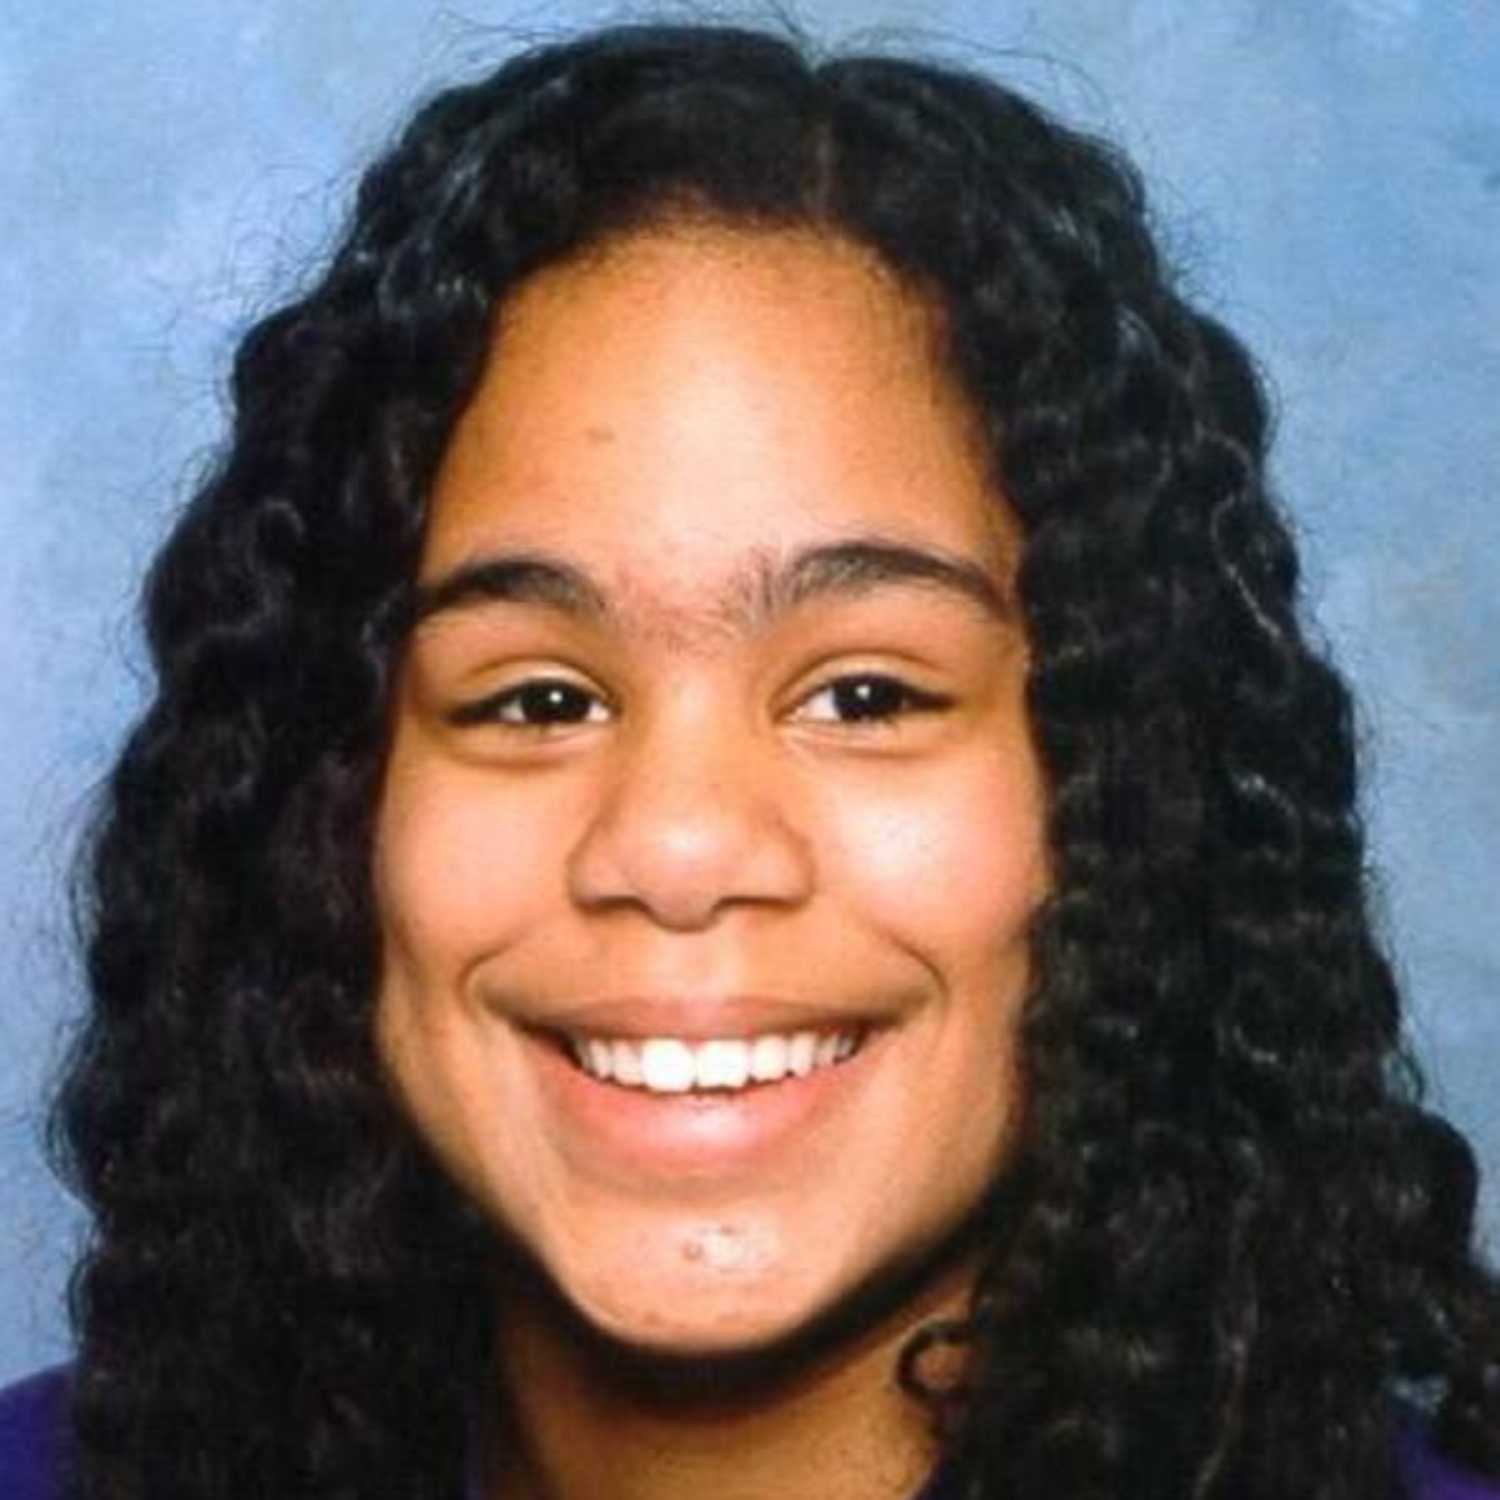 Pregnant 12-Year-Old Disappears Without a Trace- Where is Celina Mays?